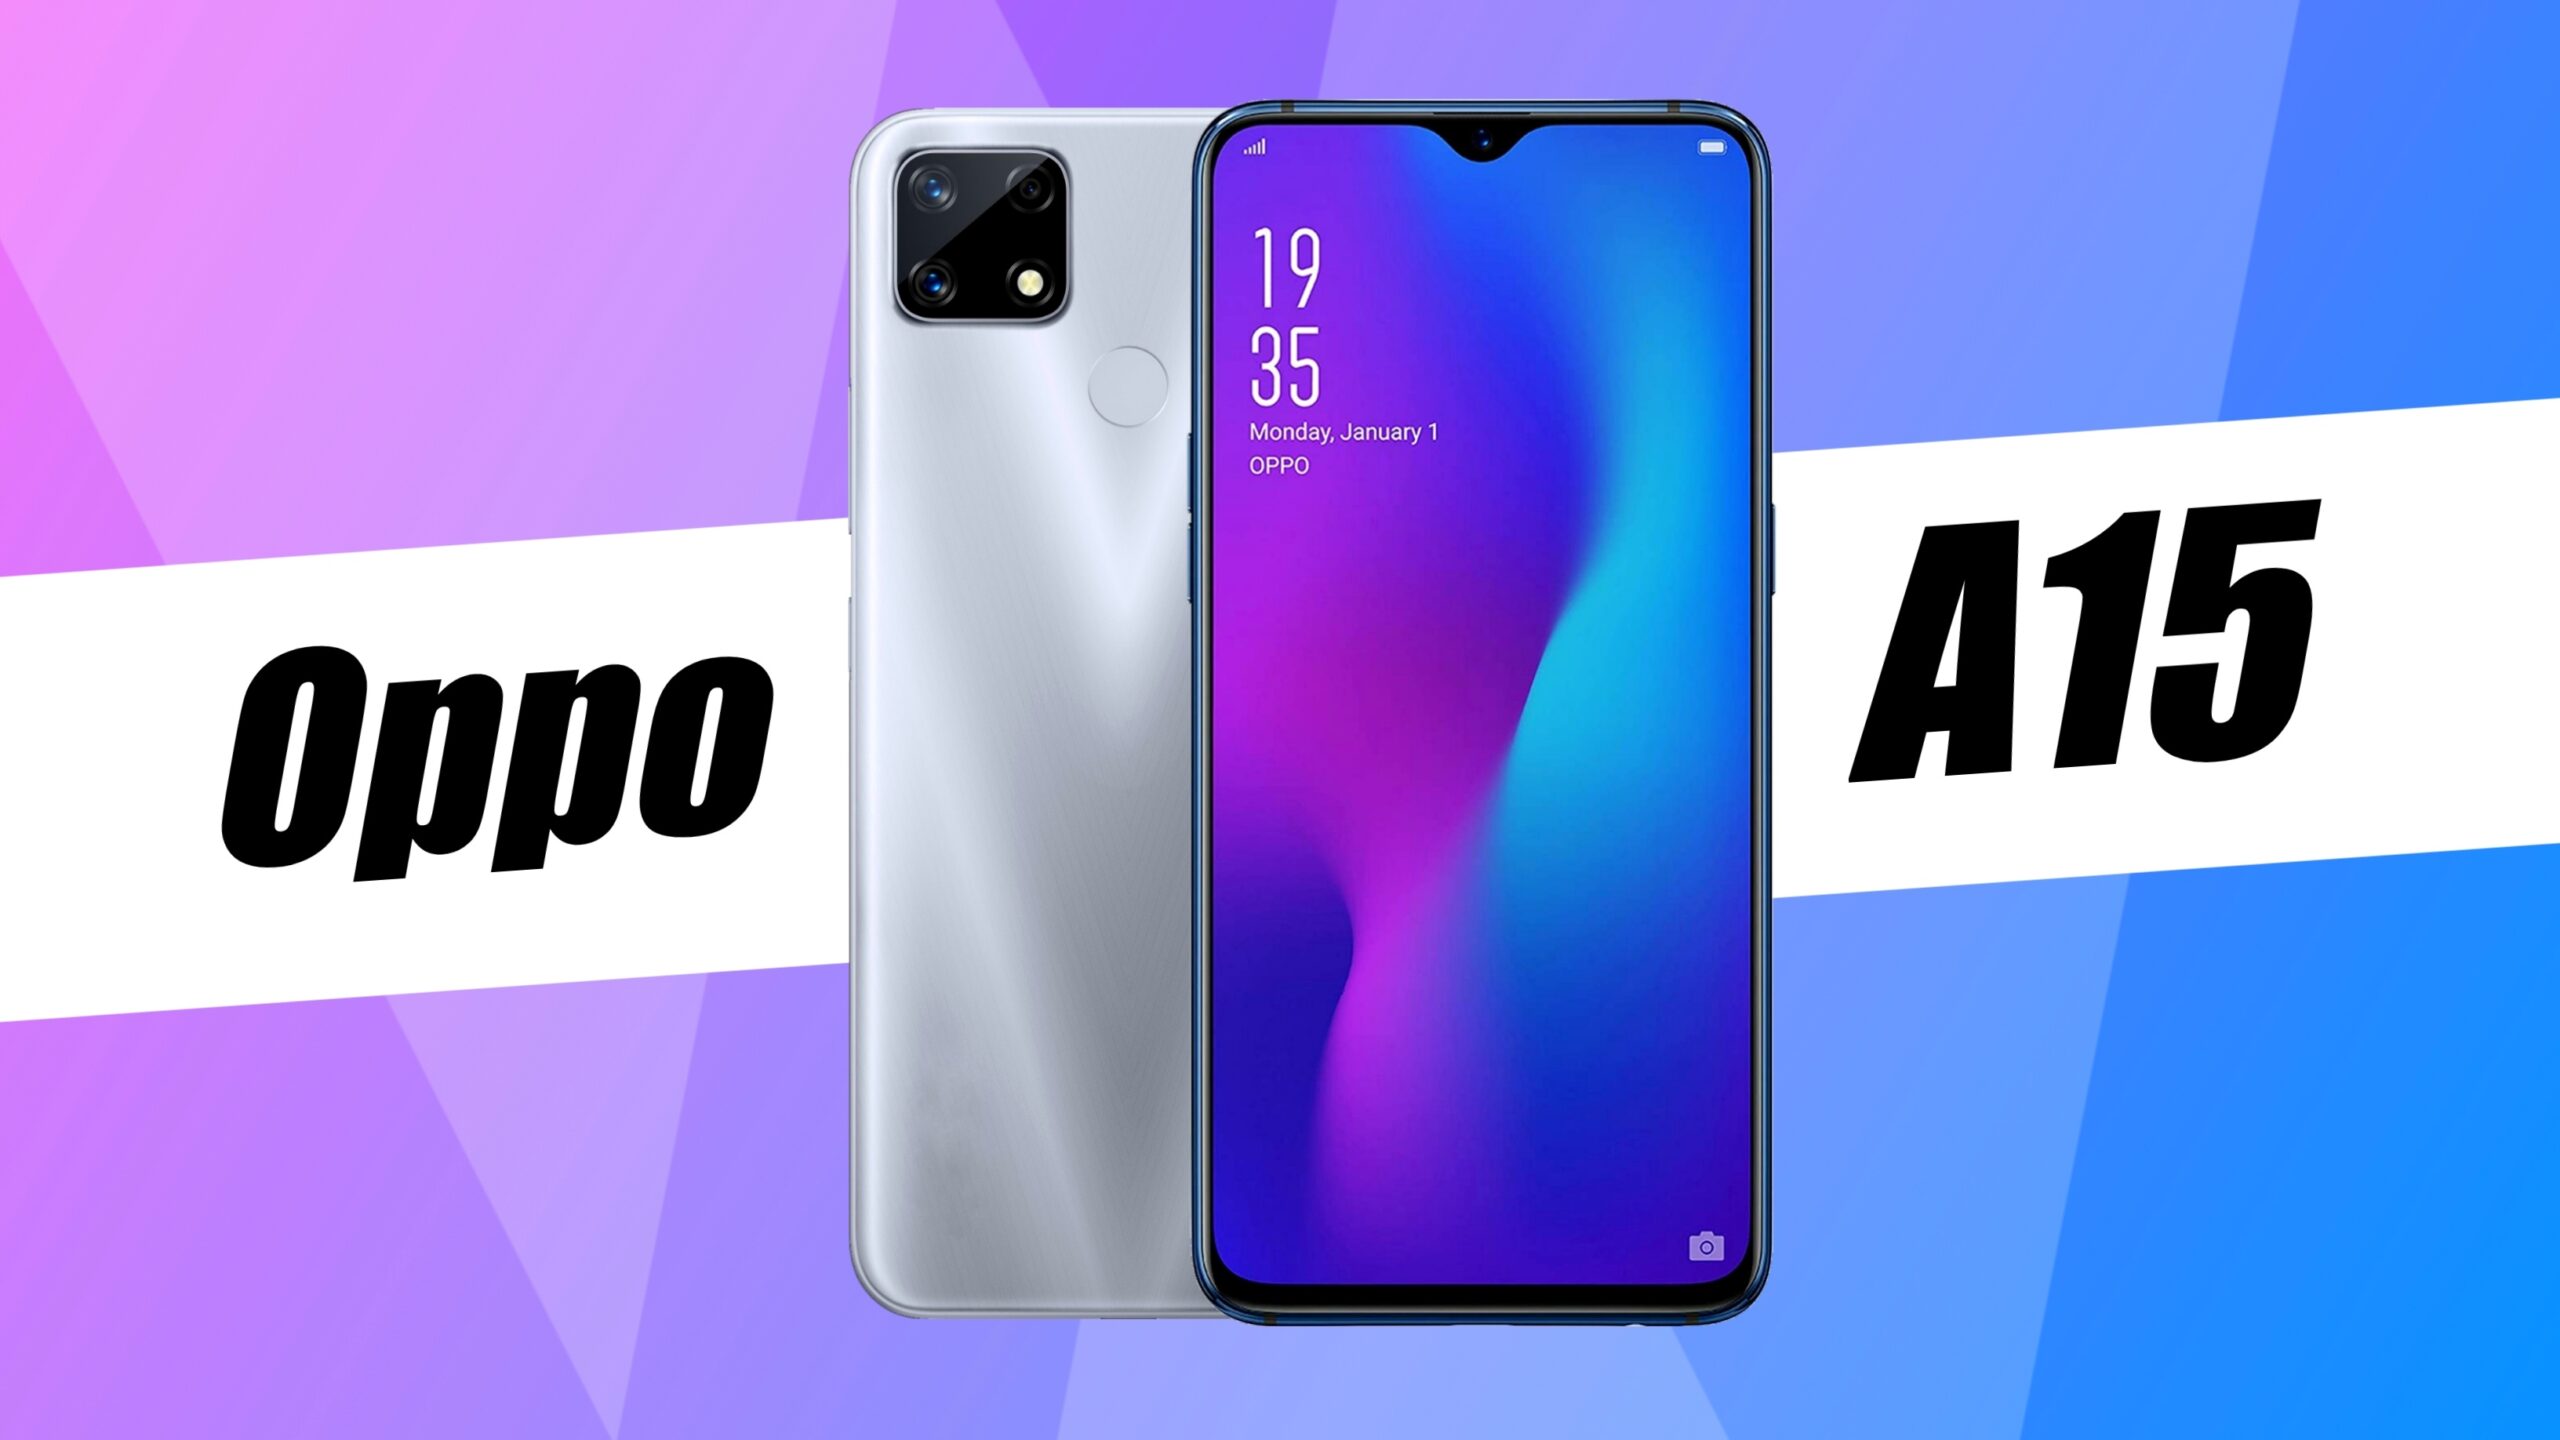 Oppo A15 Sleek & Smart Phone Review Hindi, To Be Launched Soon in India, Price in India and Specification Features RAM Camera Battery, Oppo A15 शानदार डिस्प्ले के साथ भारत में जल्द होगा लॉन्च, टीजर से हुआ खुलासा